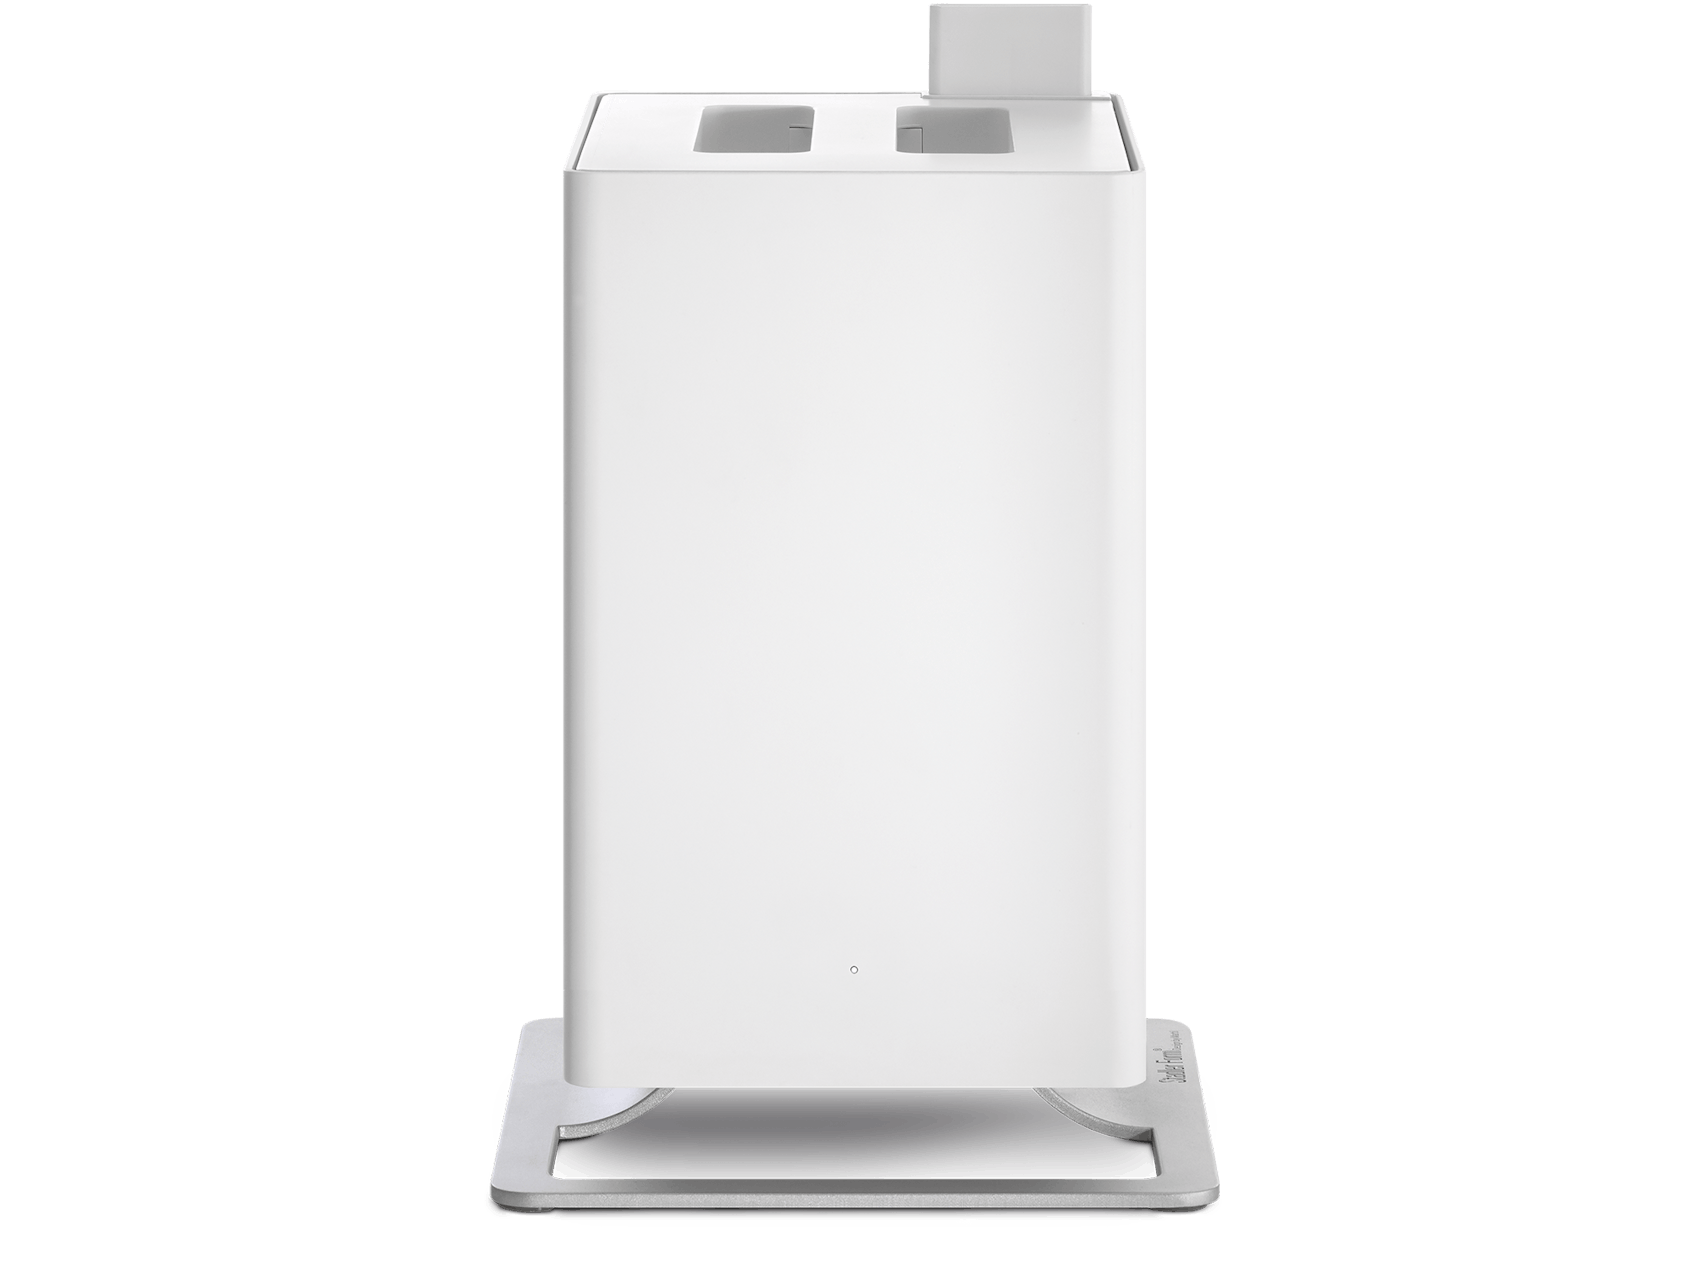 Anton humidifier by Stadler Form in white as front view